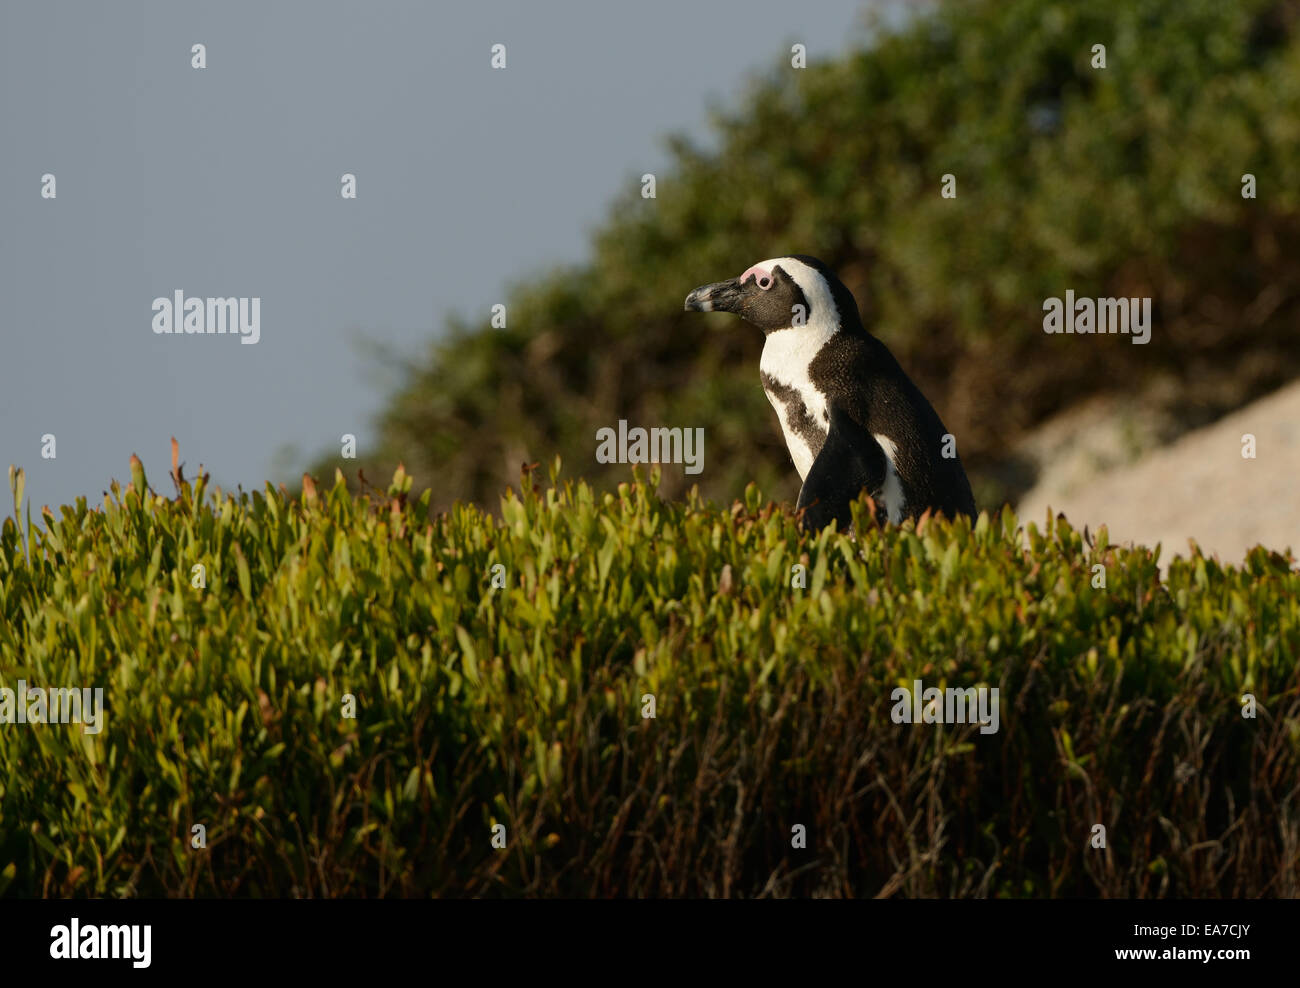 African Penguin (Spheniscus demersus) on the walk, at a beach near Cape Town in South Africa. Stock Photo